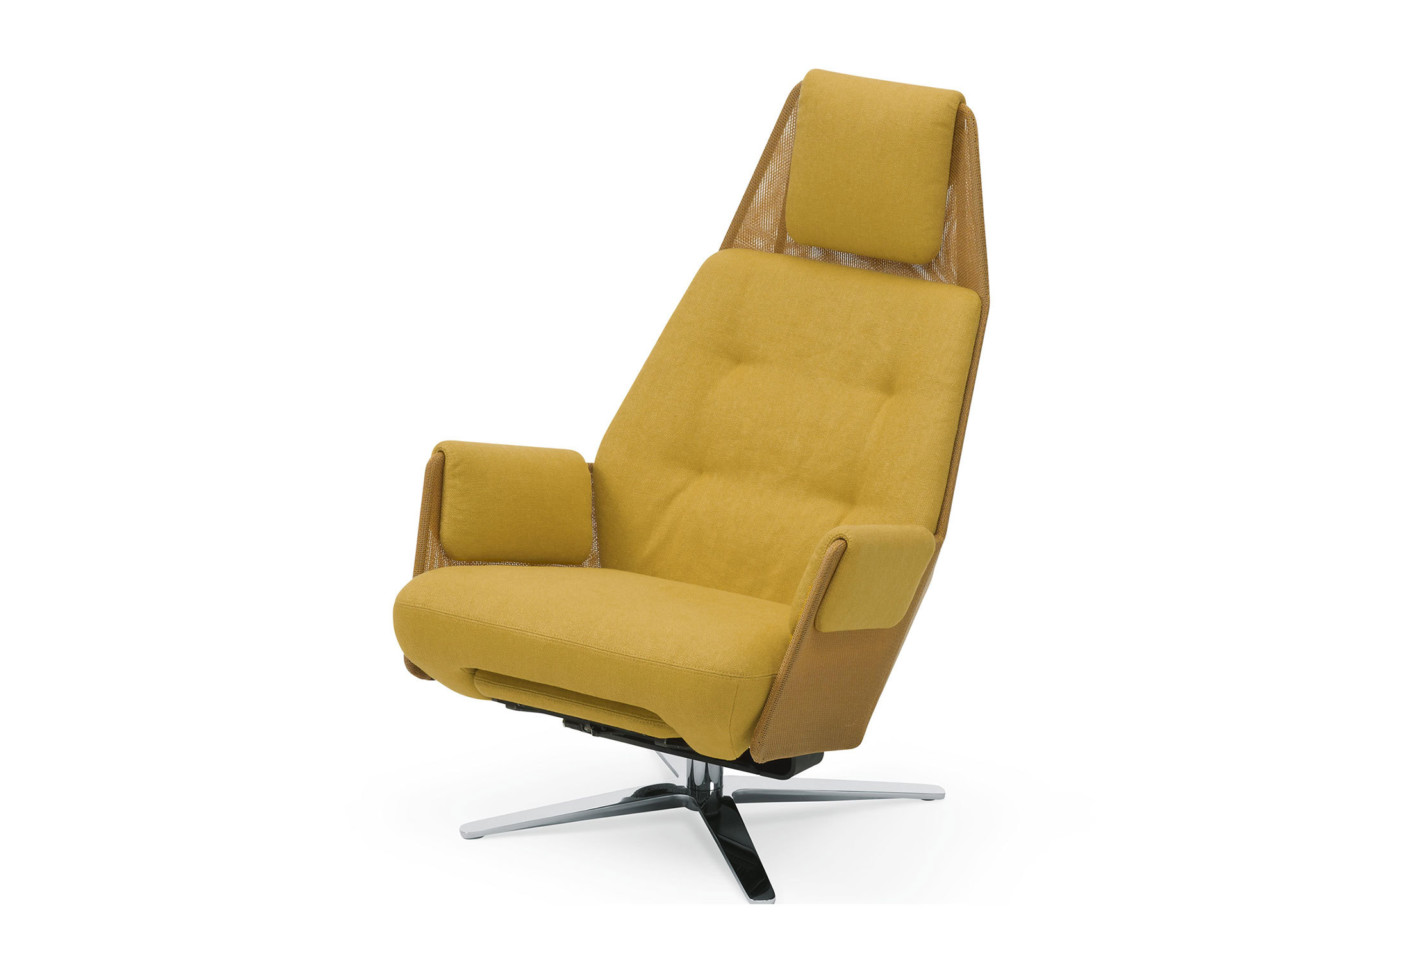 MESH Lounge Chair by Robin Rizzini for Intertime